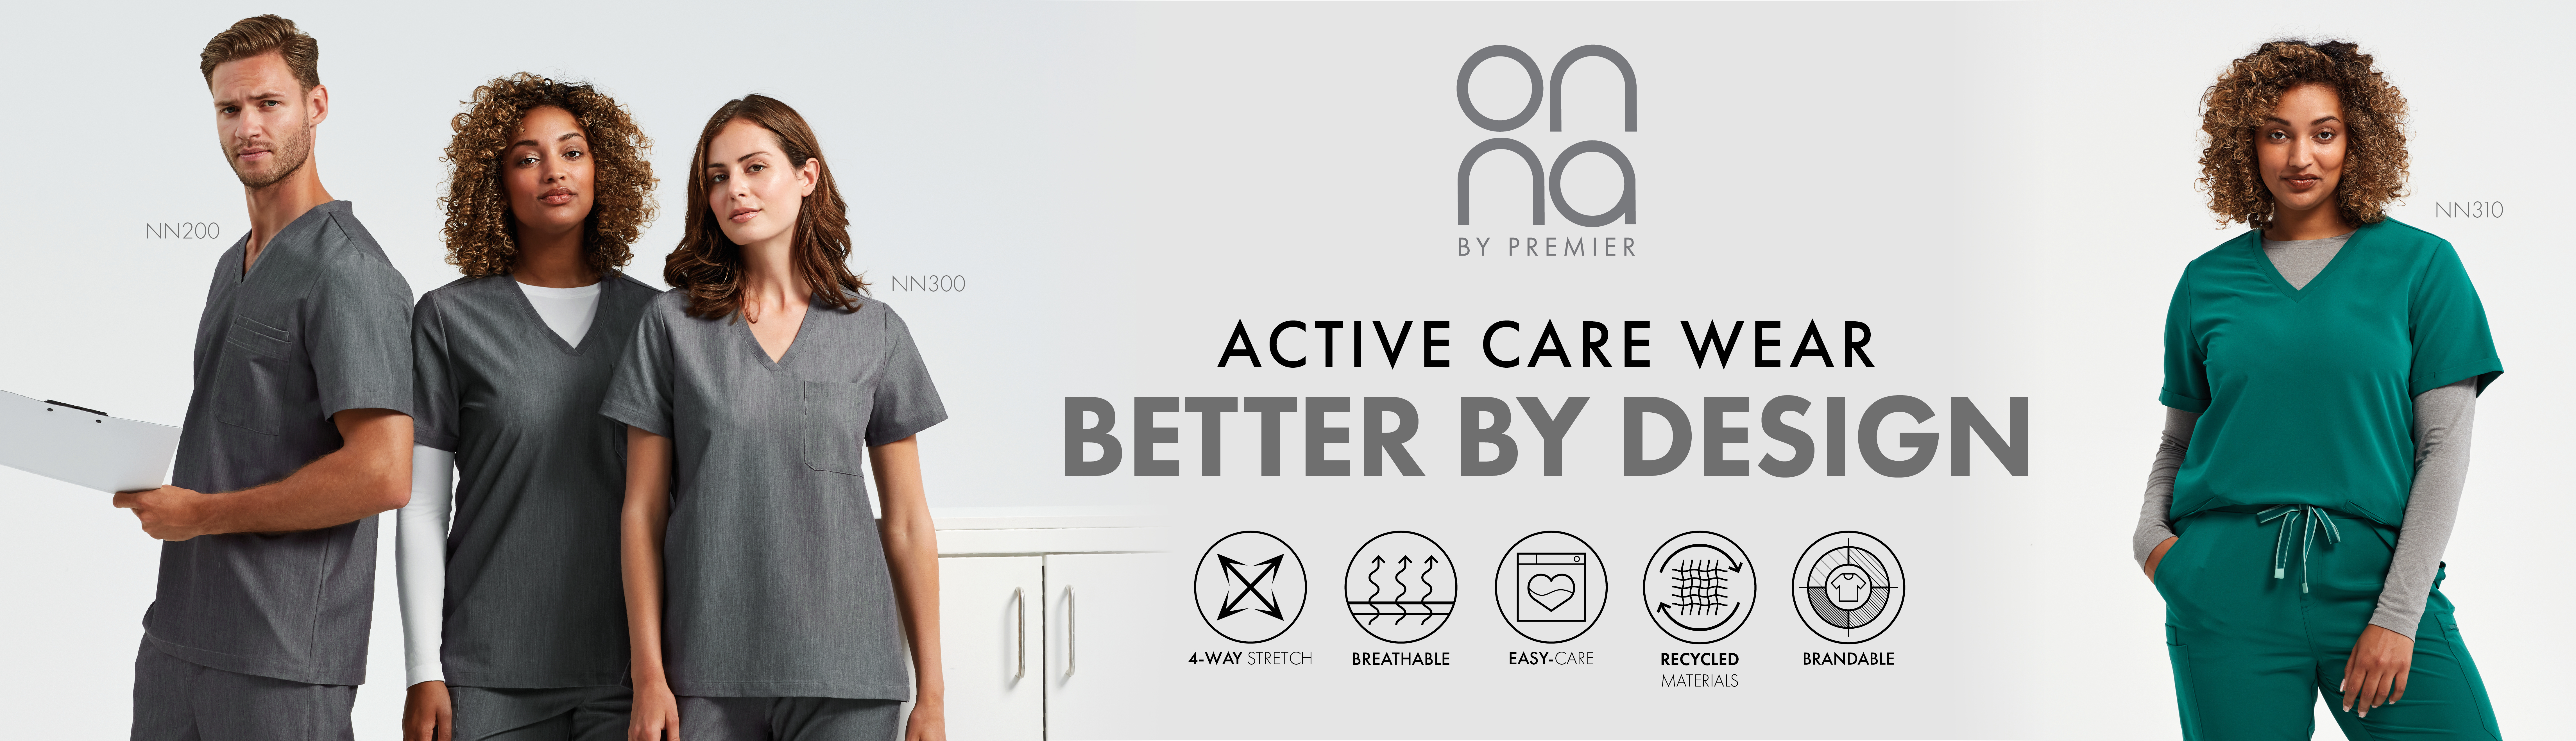 Onna by Premier - Active care wear